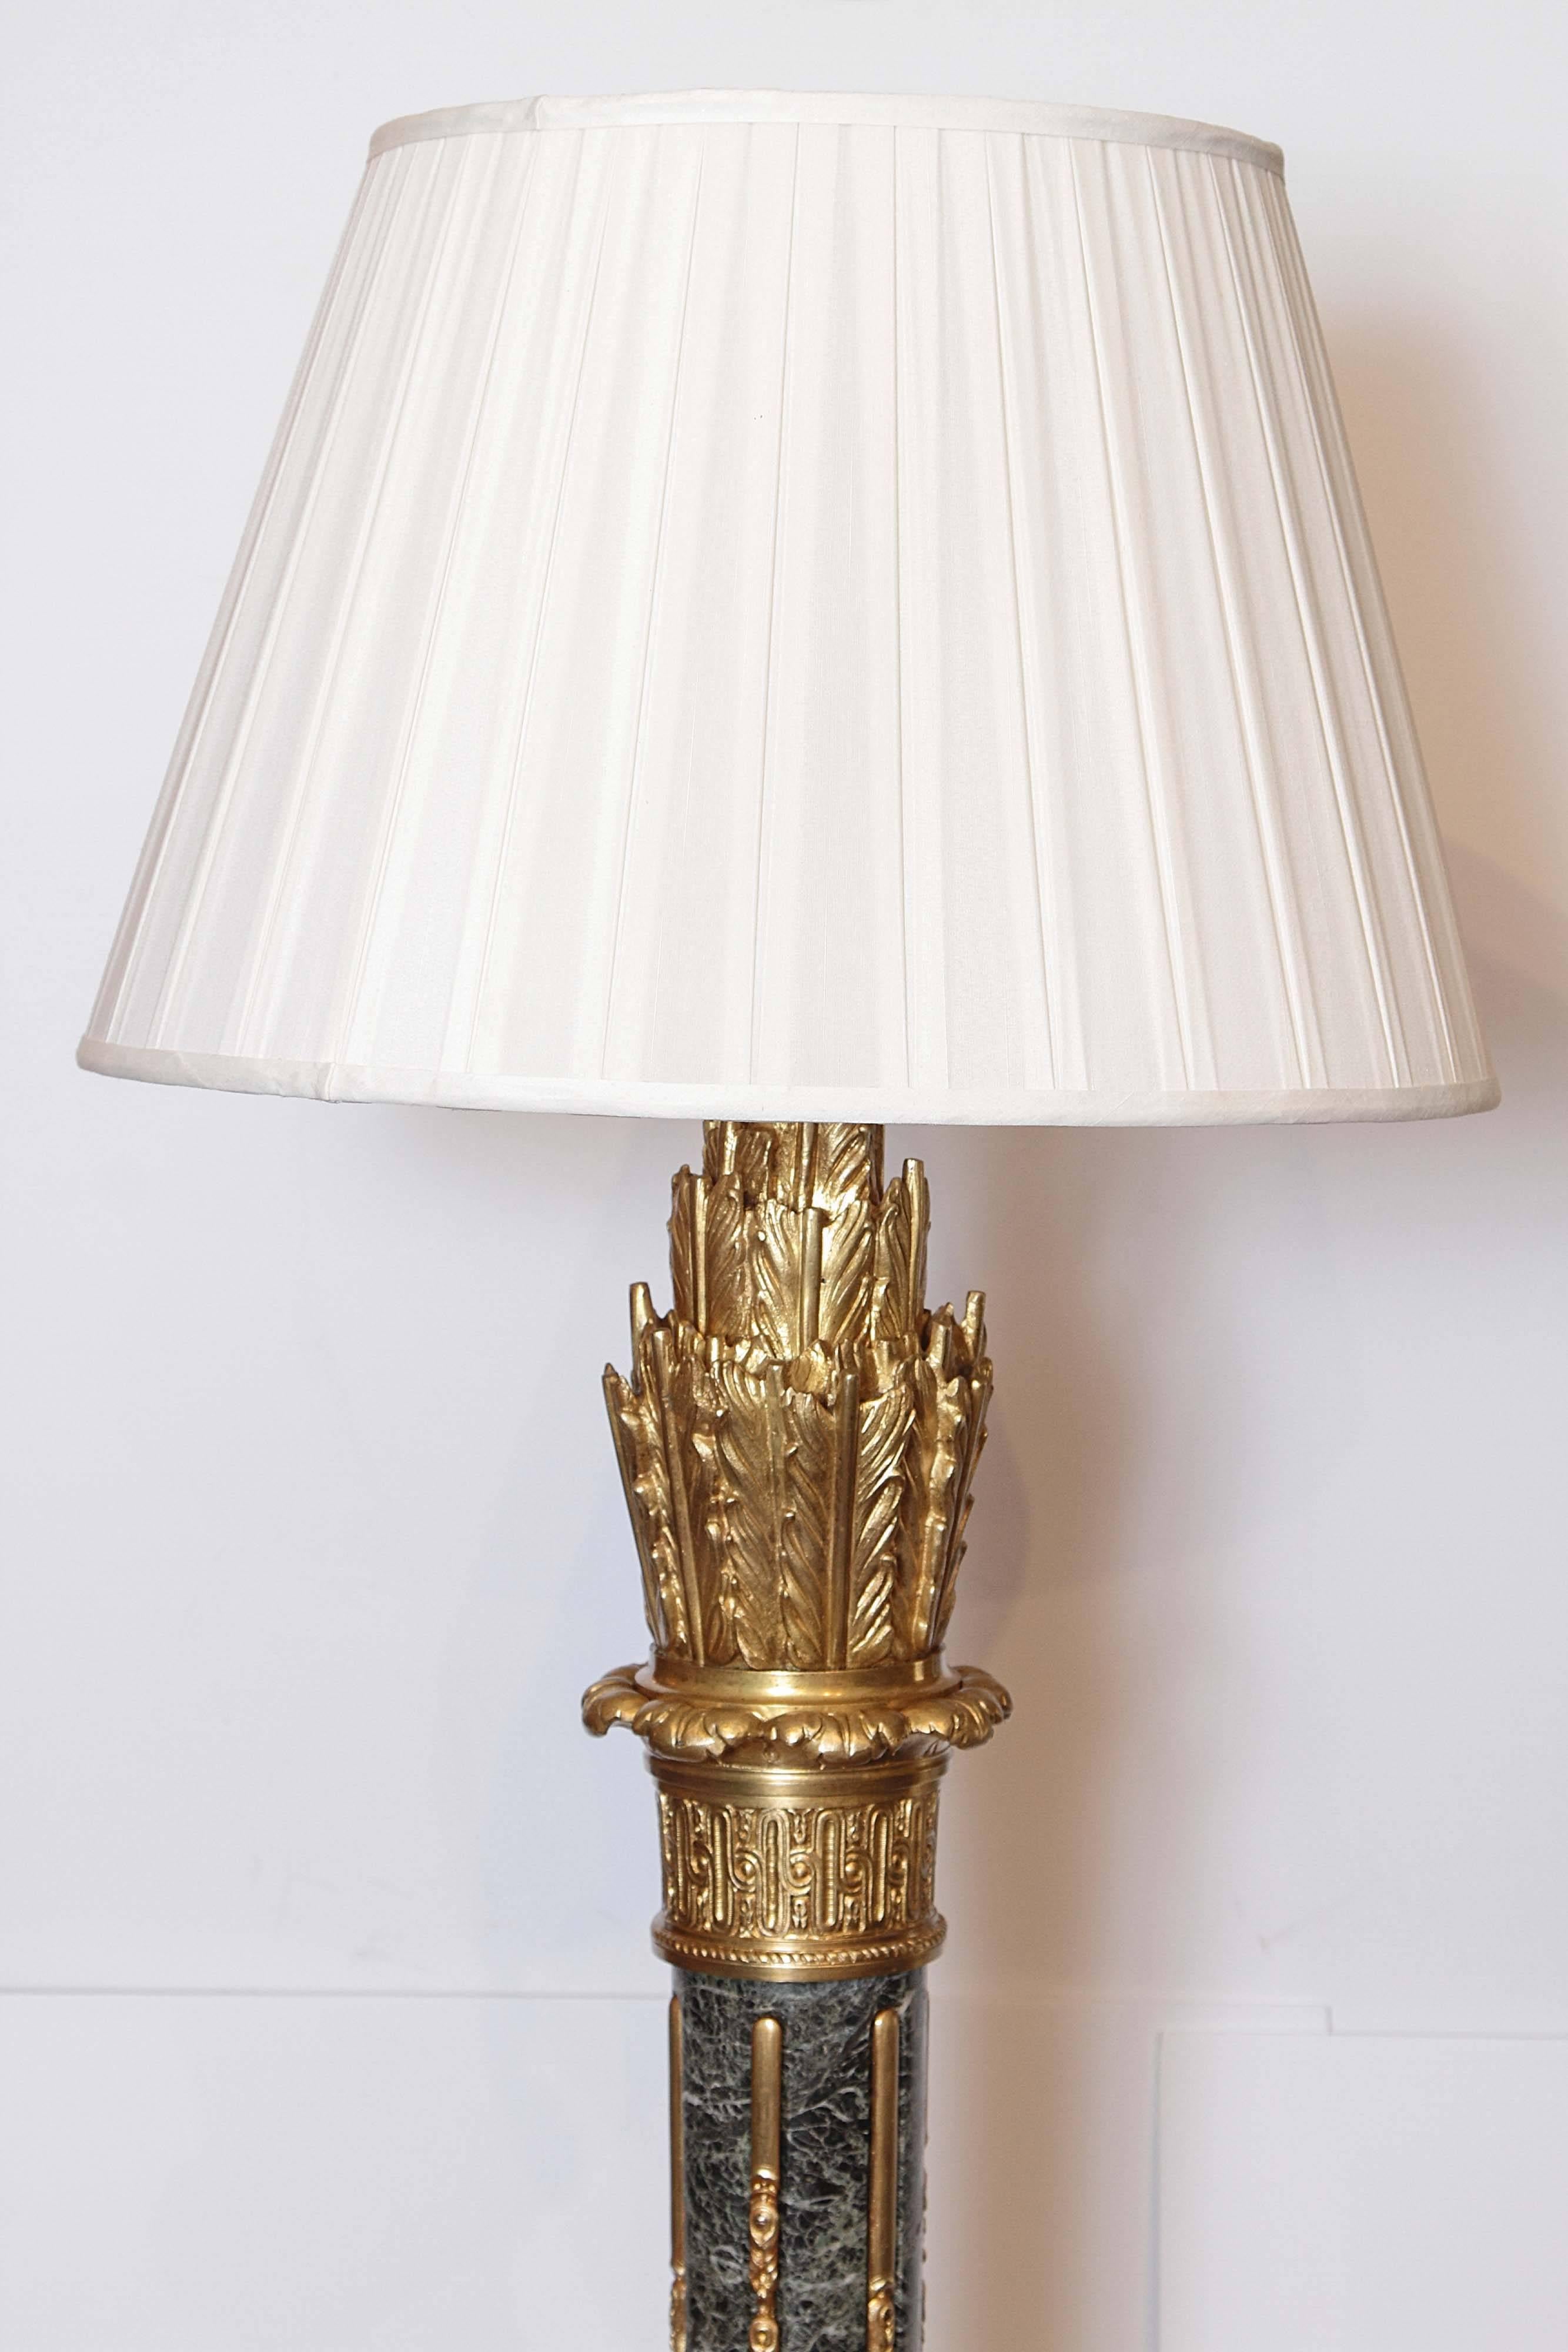 French 19th Century Empire Marble and Gilt Bronze Floor Lamp